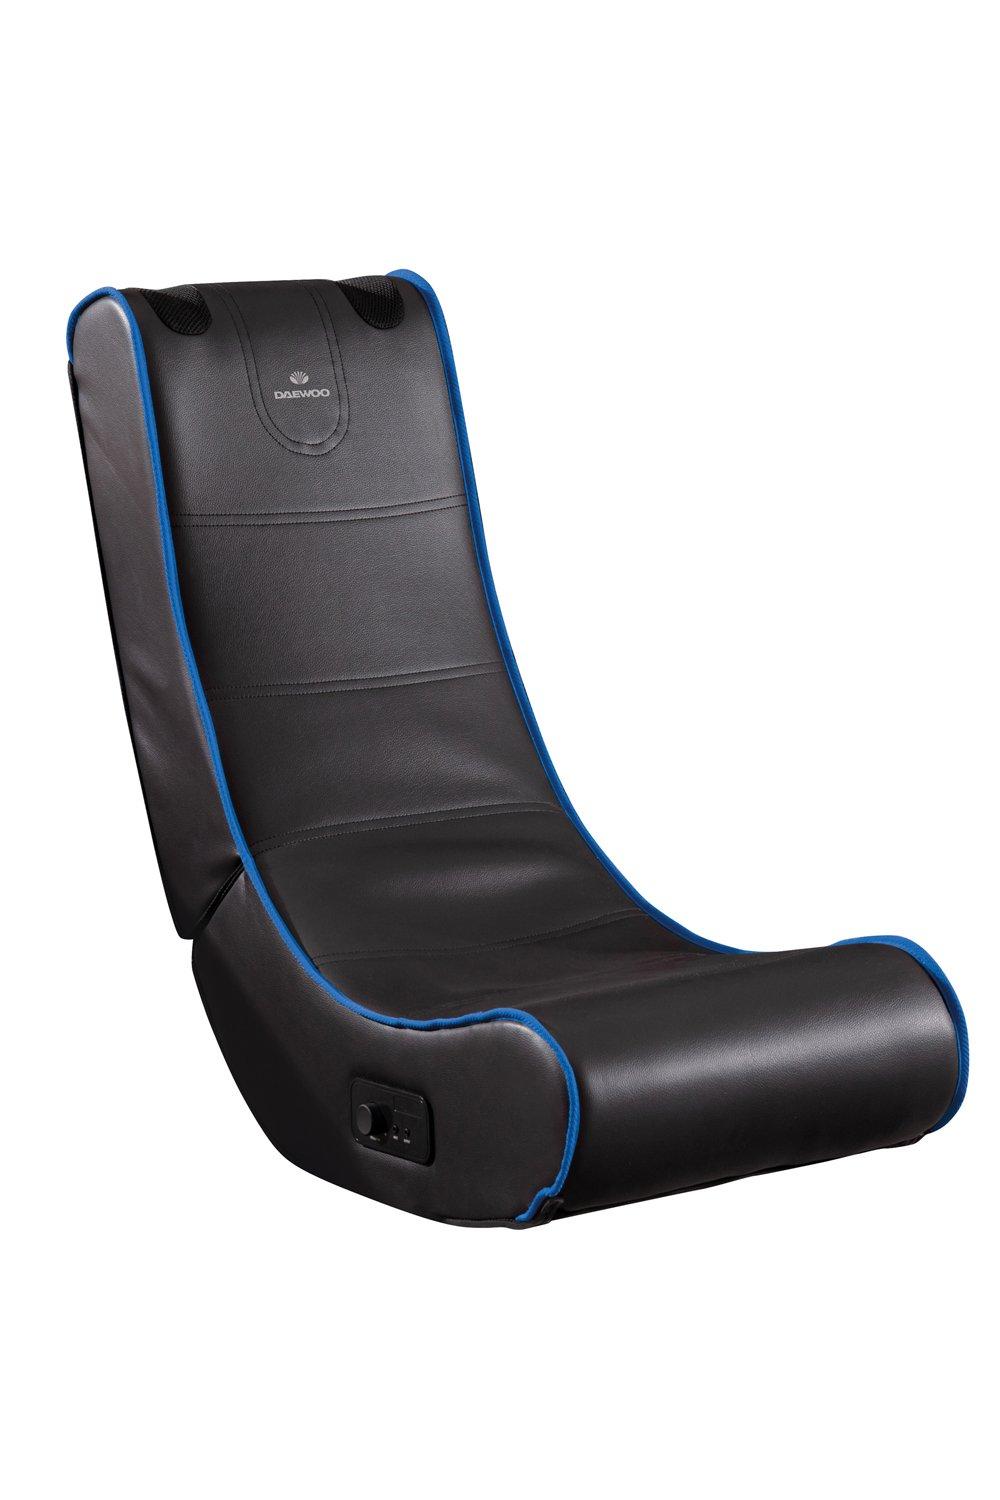 Rocker Gaming Chair with Stereo Speakers Bluetooth Rechargeable Black